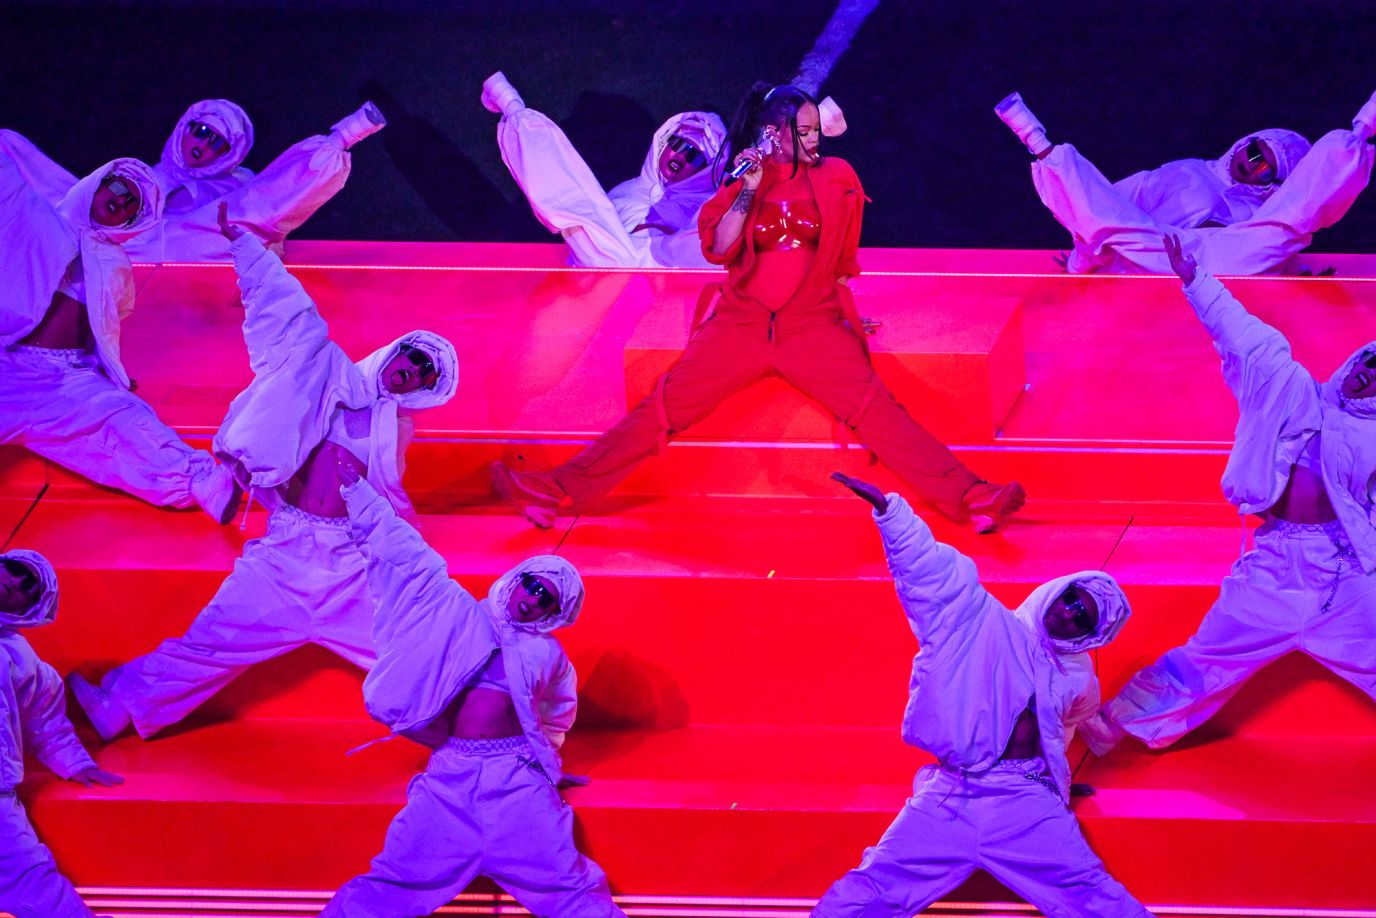 Rihanna performed with dozens of backup dancers.